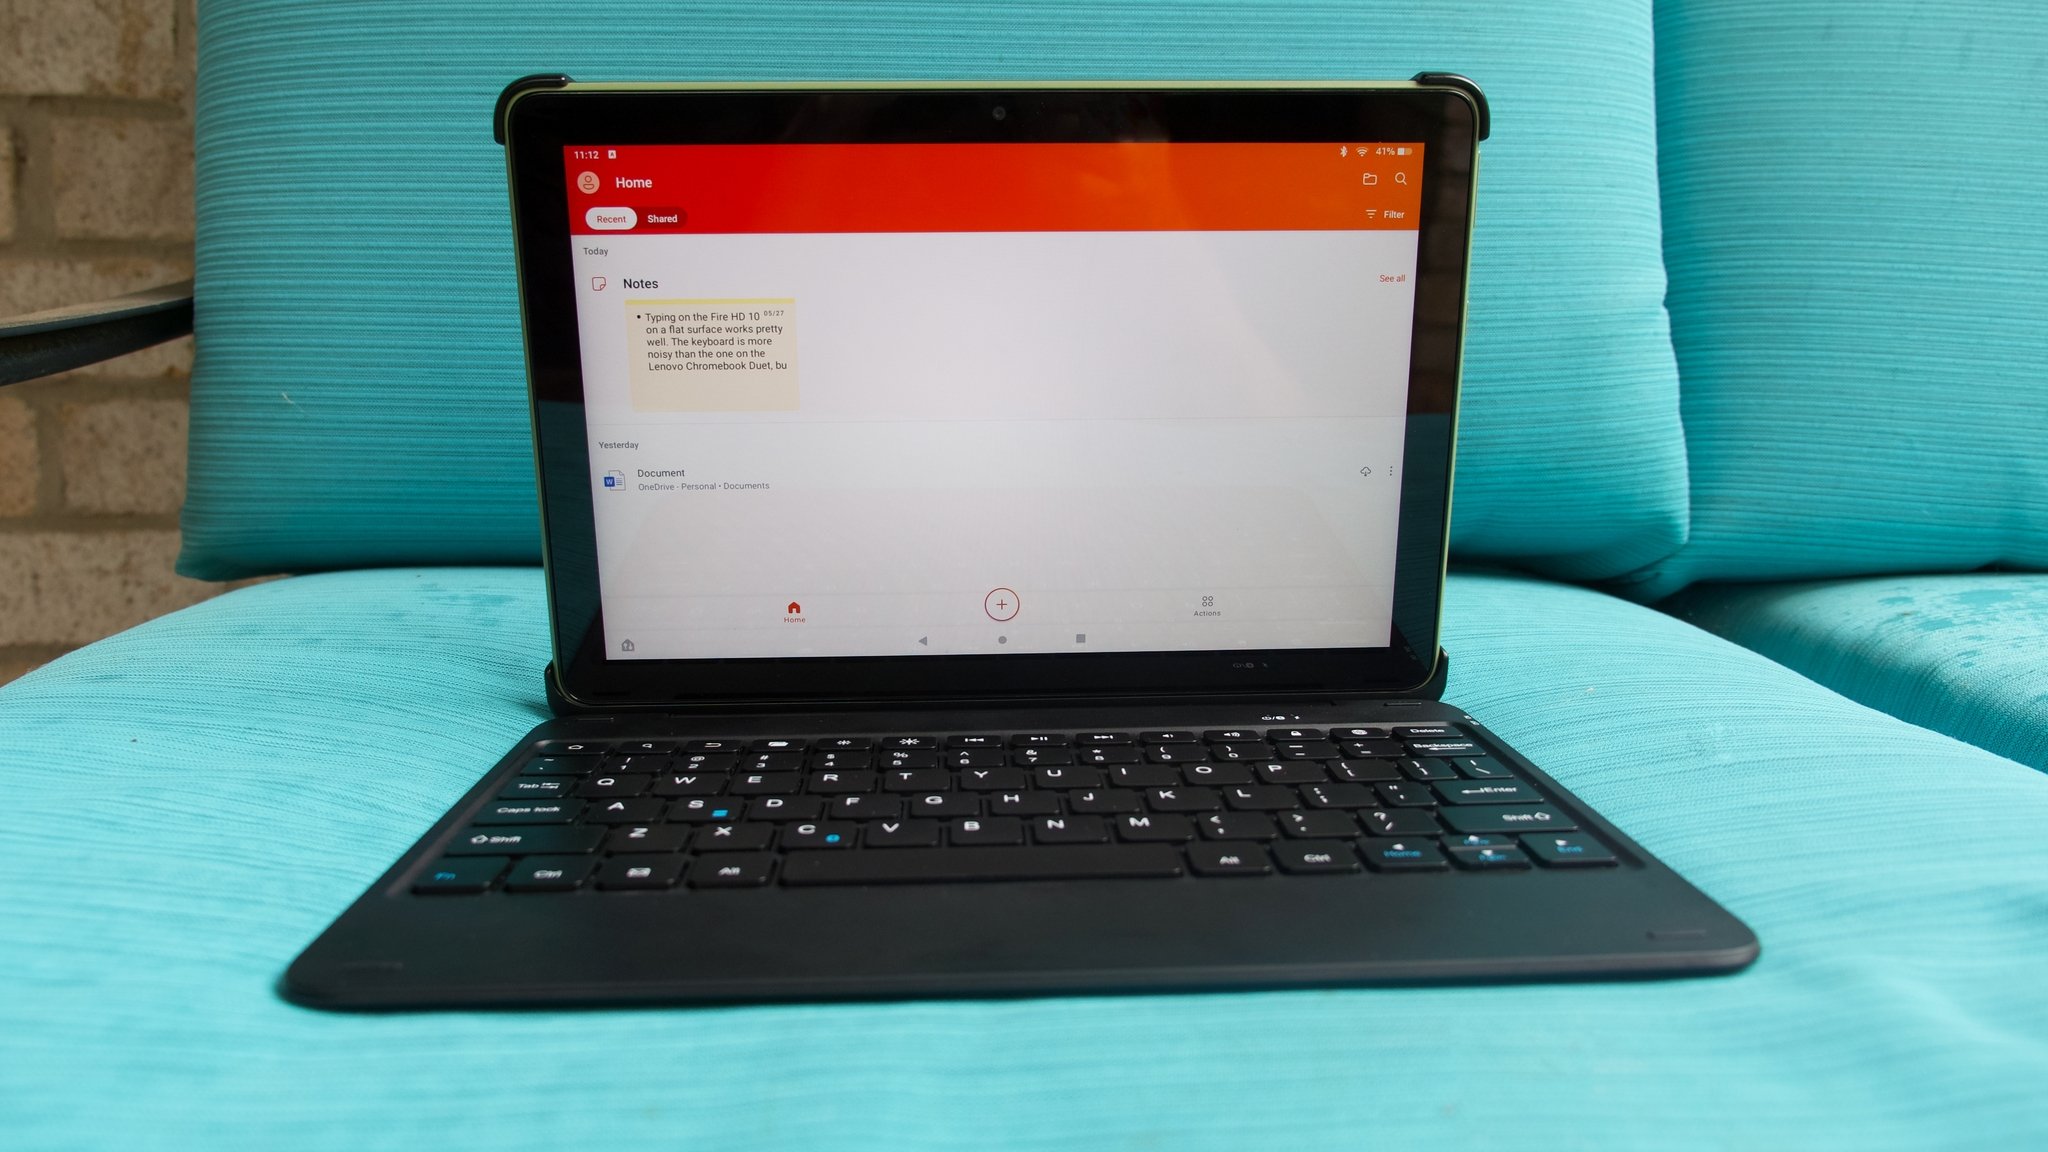 Amazon Fire Hd 10 2021 Productivity with keyboard attached taking notes